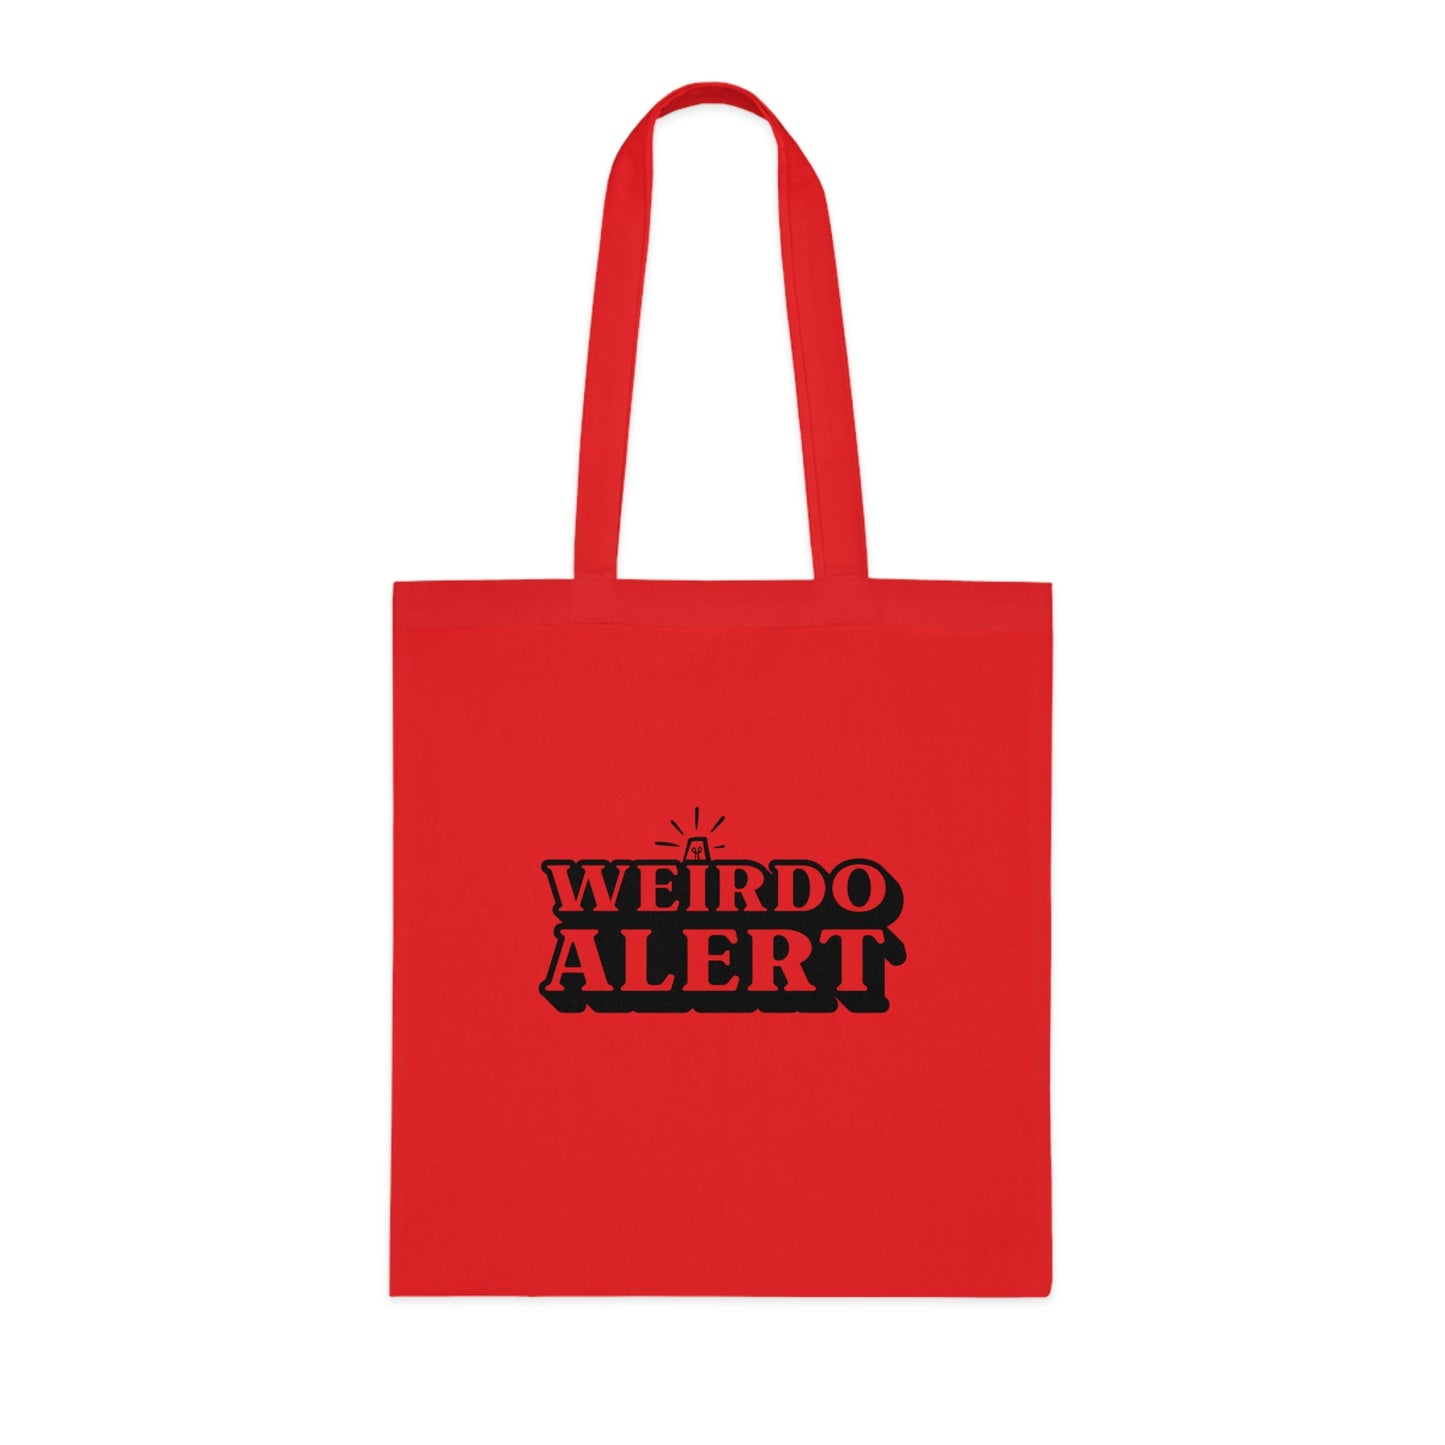  Weirdo | 100% cotton tote bag. Red with the WEIRDO ALERT funny meme printed at the front of the red cotton tote bag.